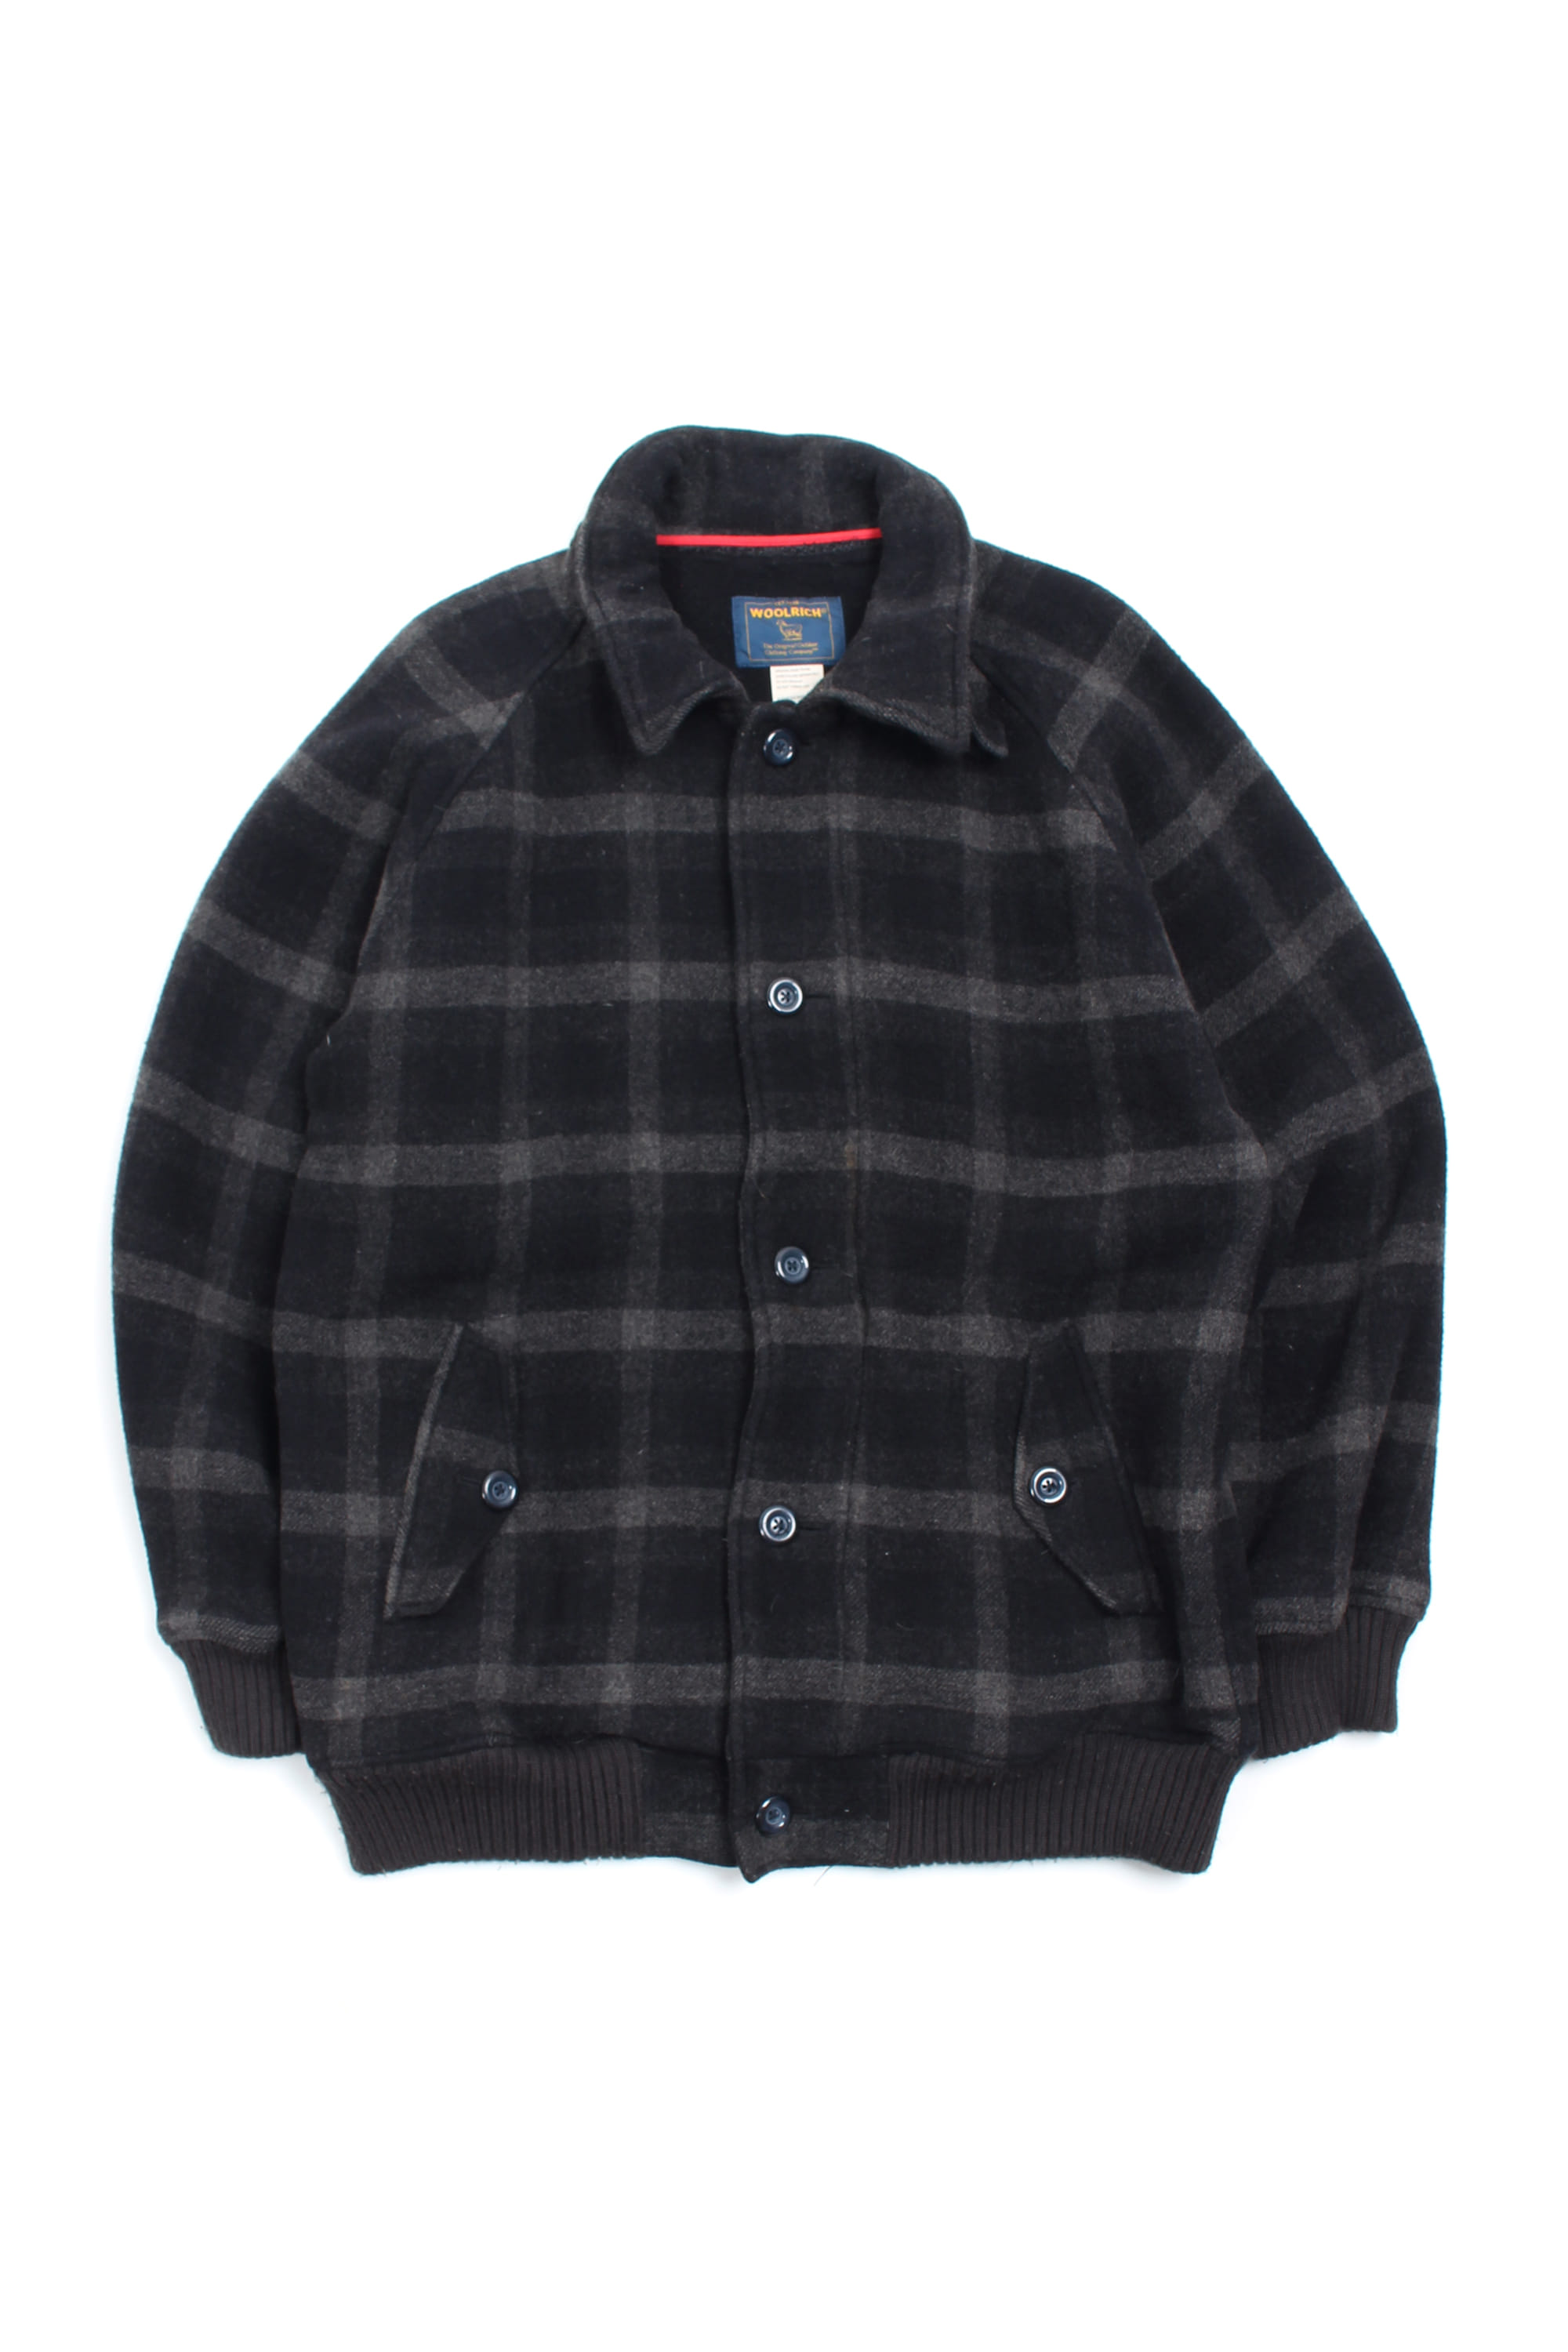 WOOLRICH Check Jacket